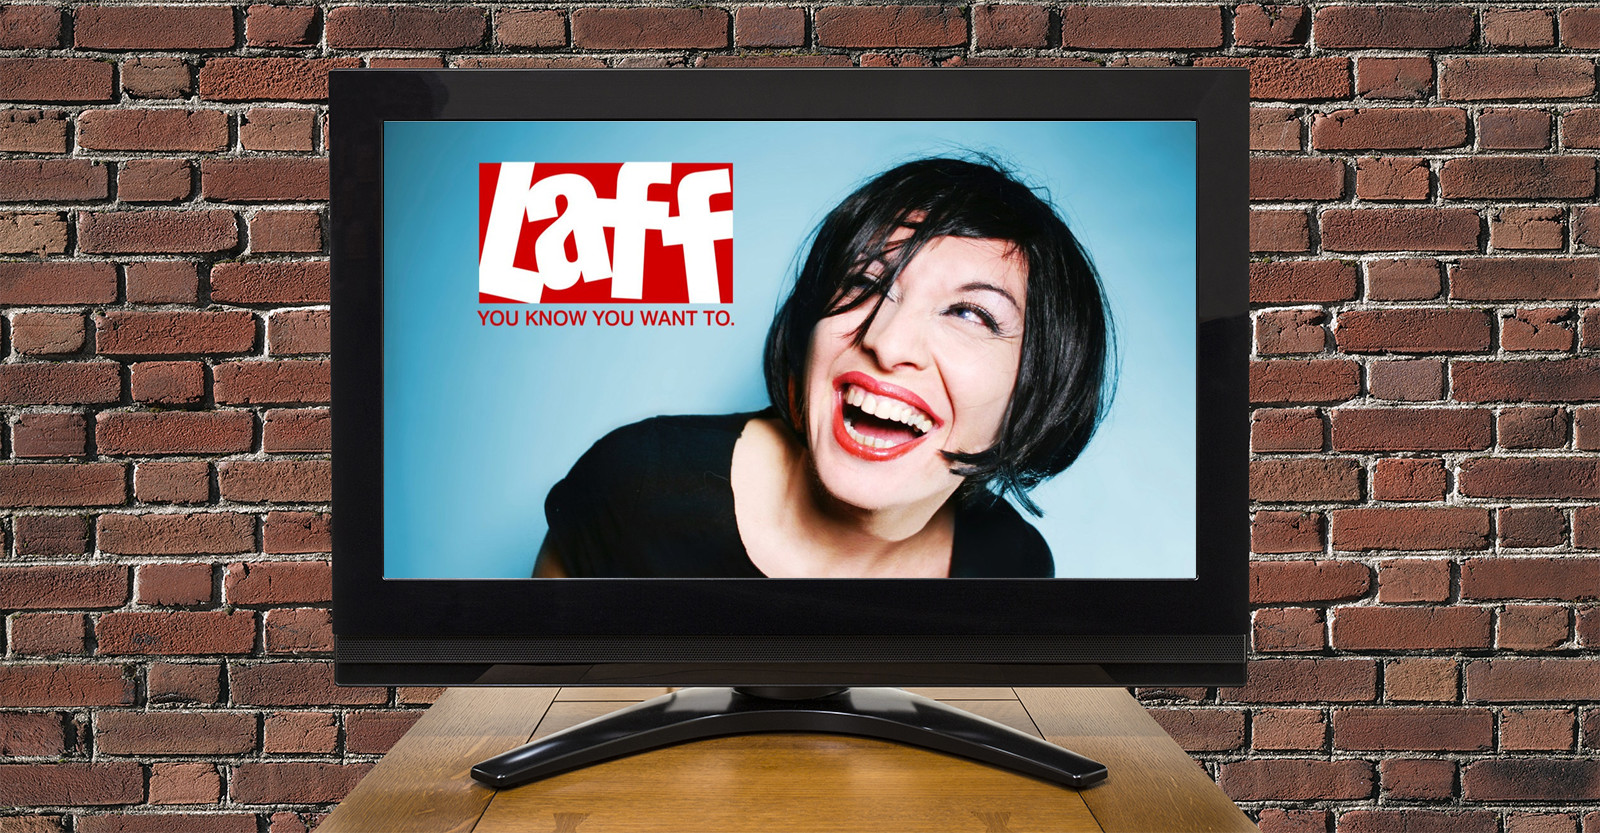 Laff TV promo image on a TV screen in front of a brick wall